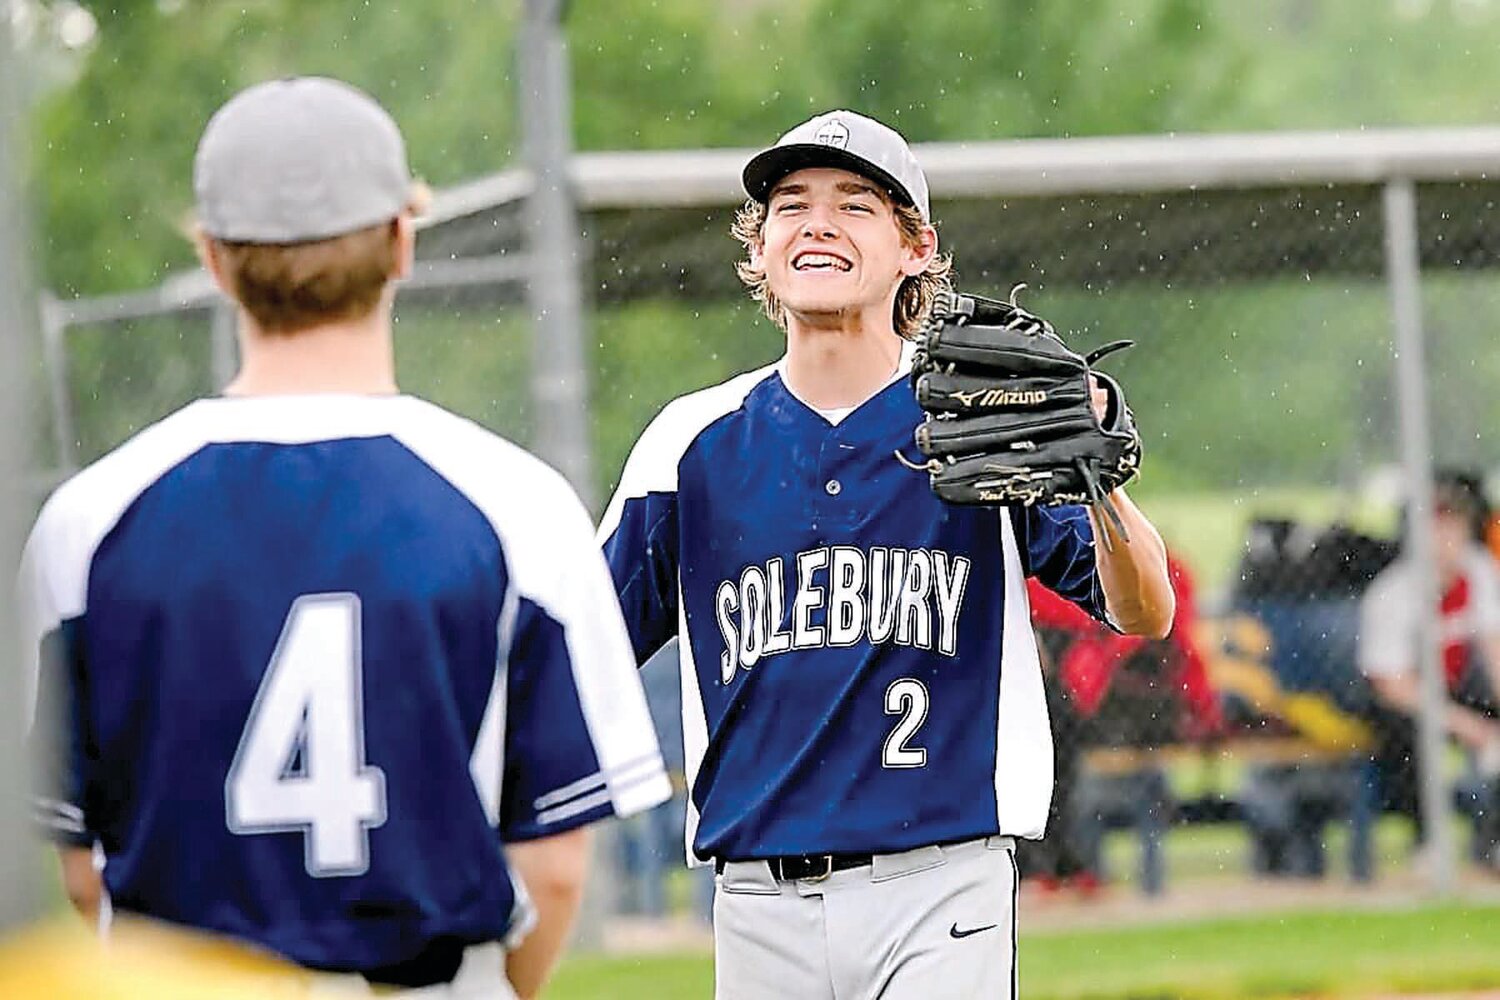 Solebury School senior Ryan Eichem went 2-1 with a 2.74 ERA and 25 strikeouts in 28.1 innings as a pitcher this season.